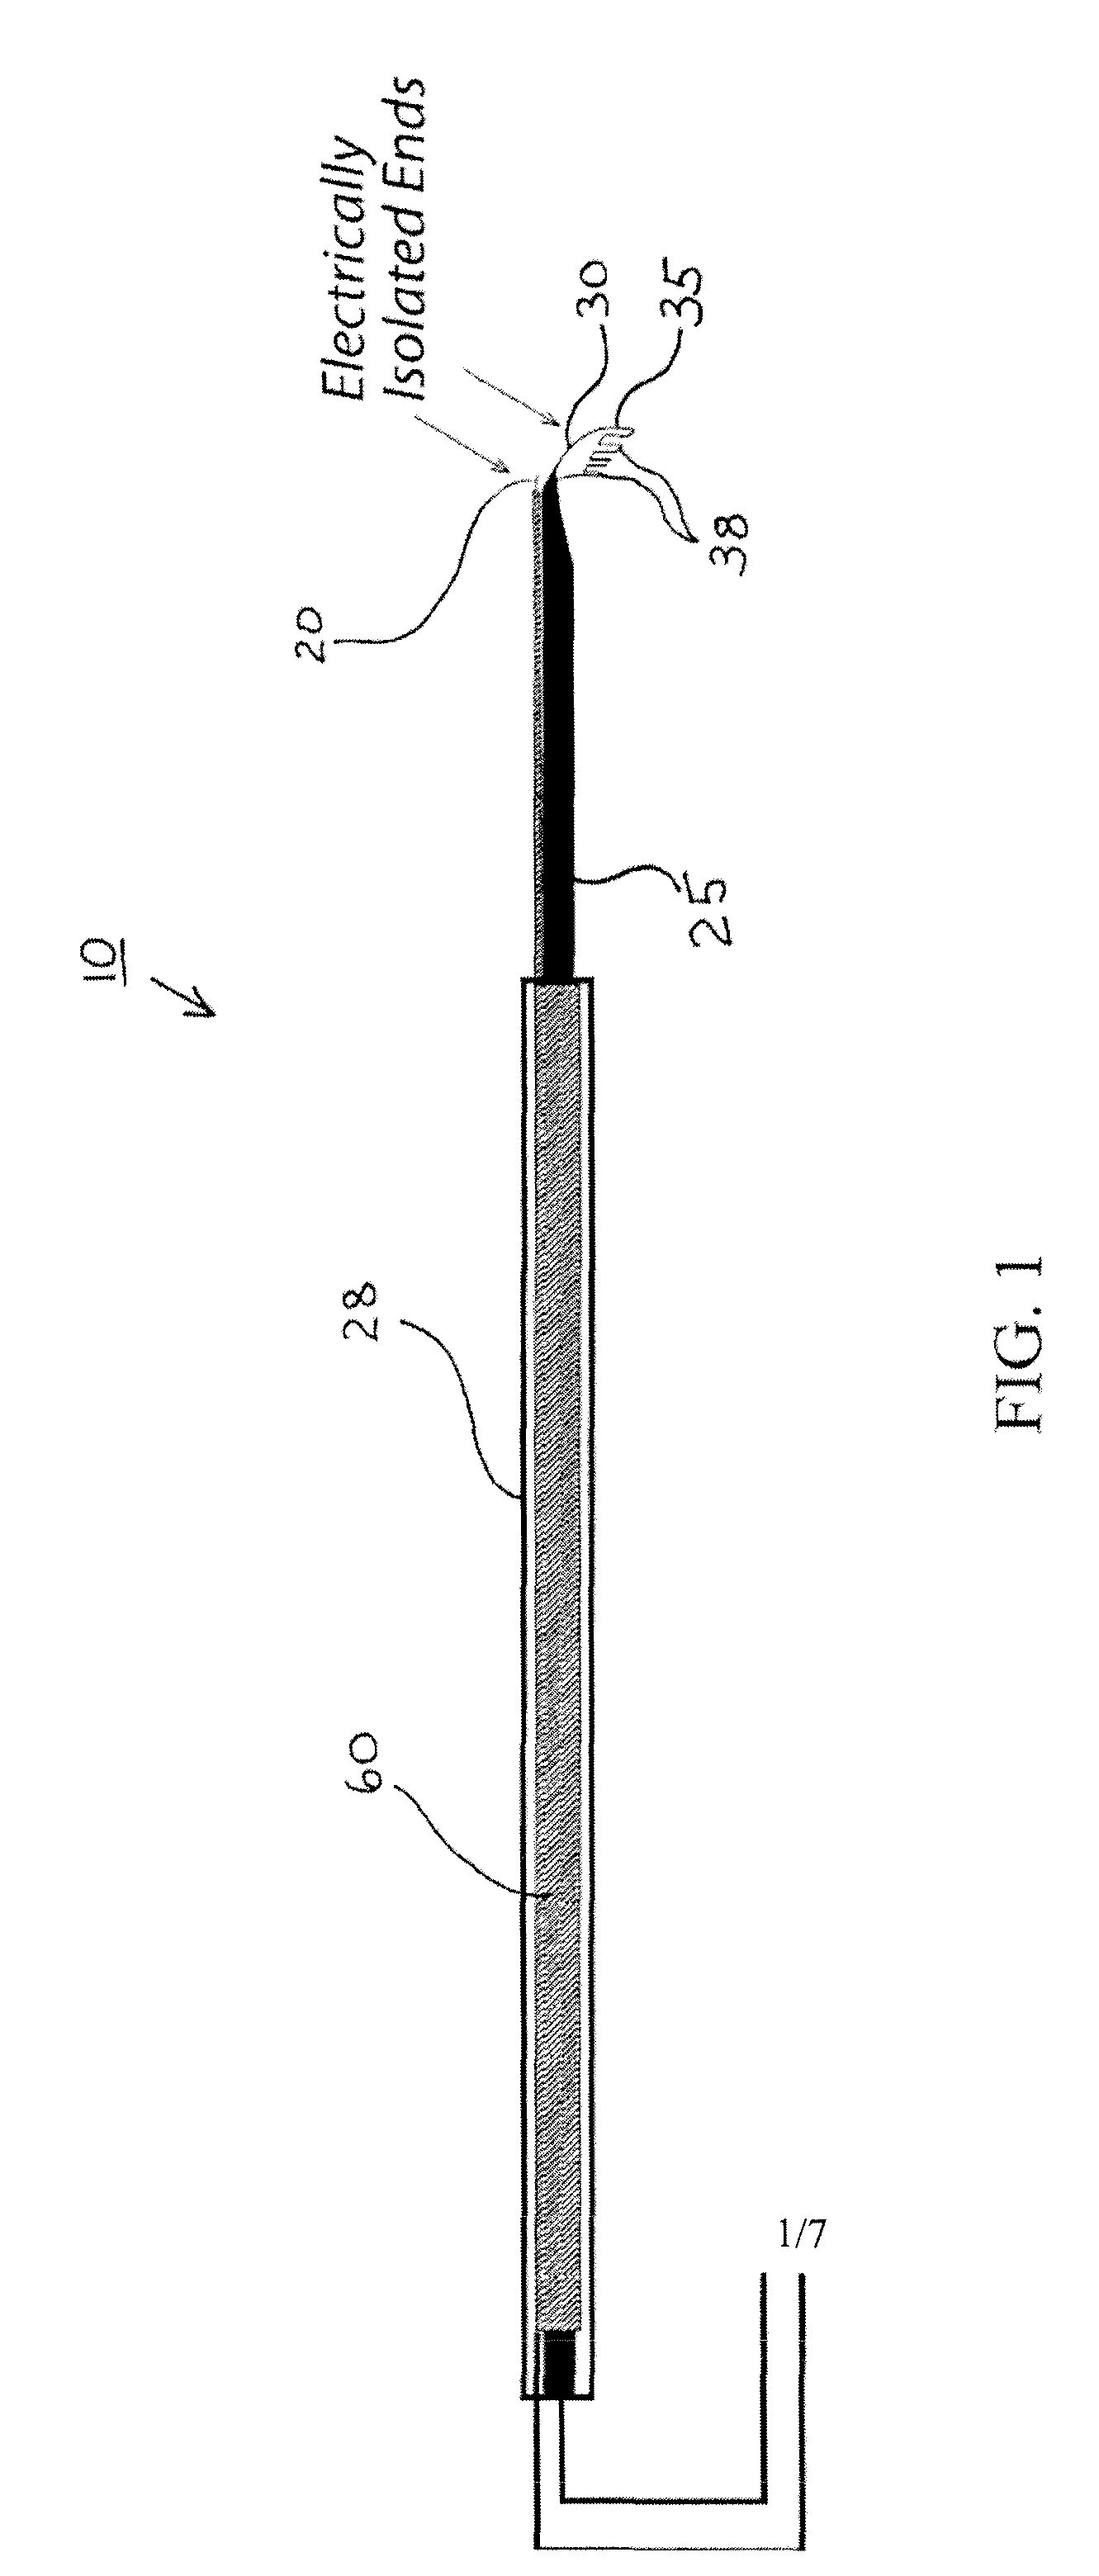 Methods and devices for differentiating between tissue types